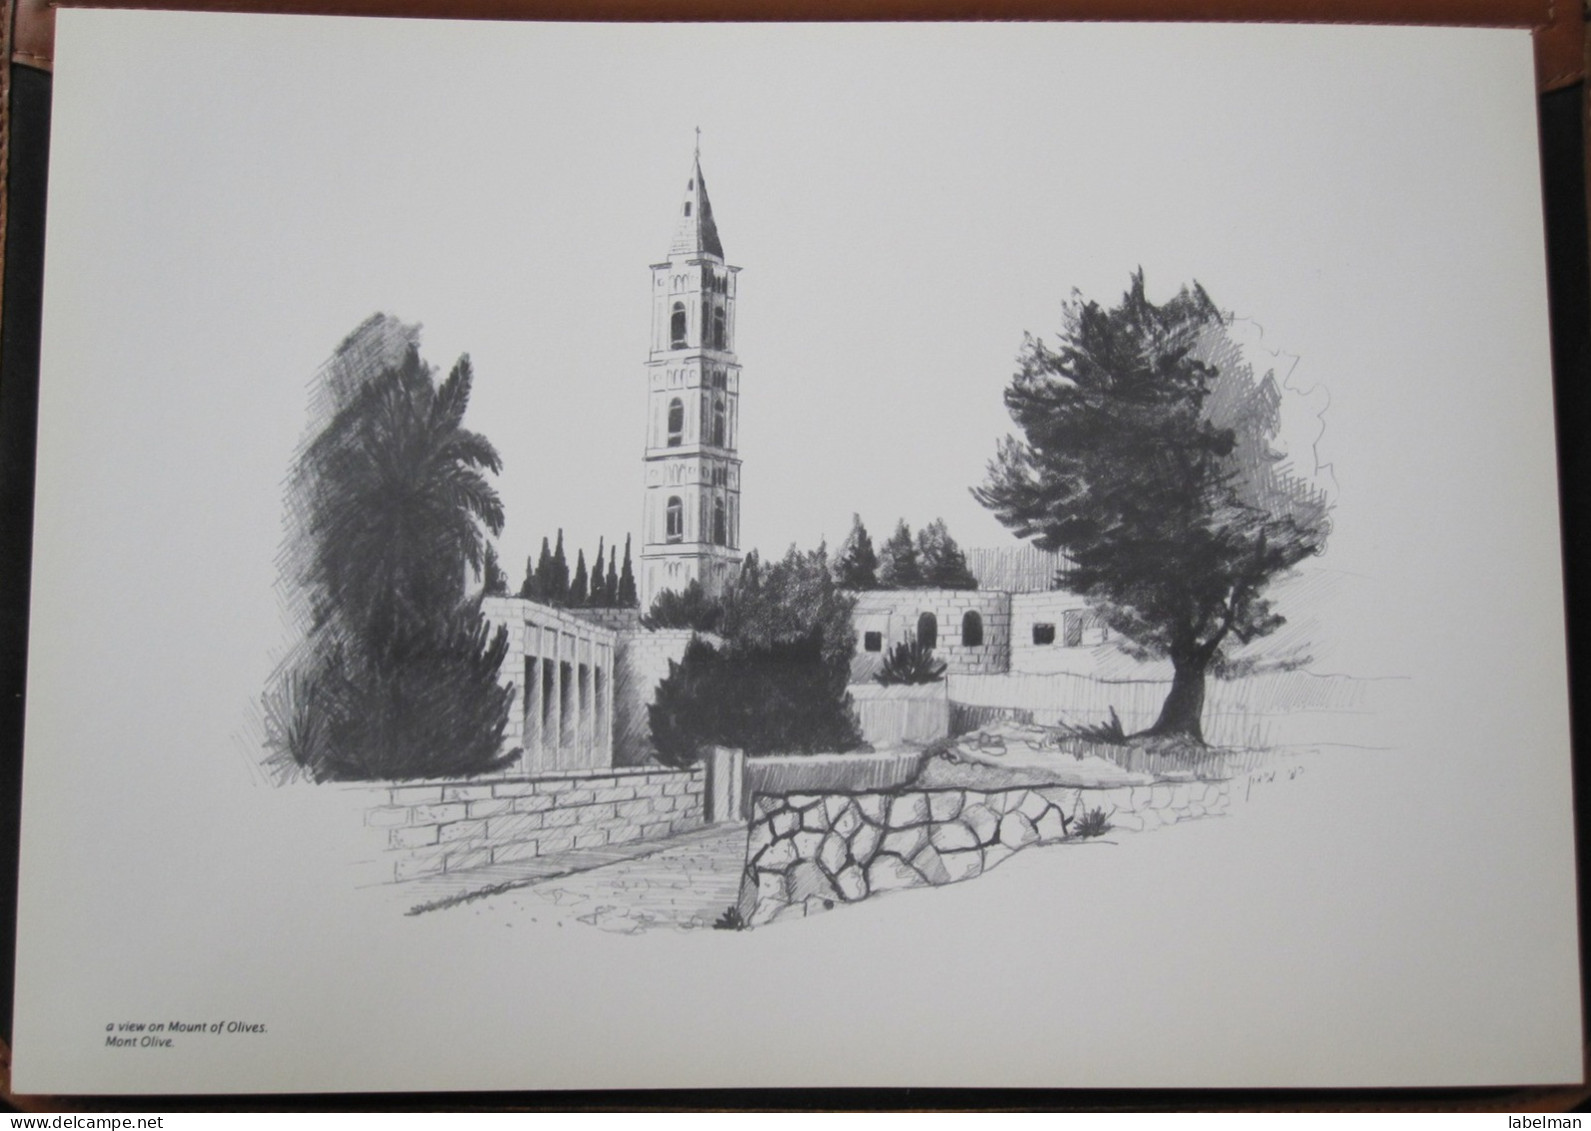 ISRAEL HOLY LAND DRAWING ILLUSTRATION PAINTING TERRE SAINTE RAPHY MAYMON MOUNT OF OLIVES SCOPUS PICTURE POSTCARD PHOTO - Israel